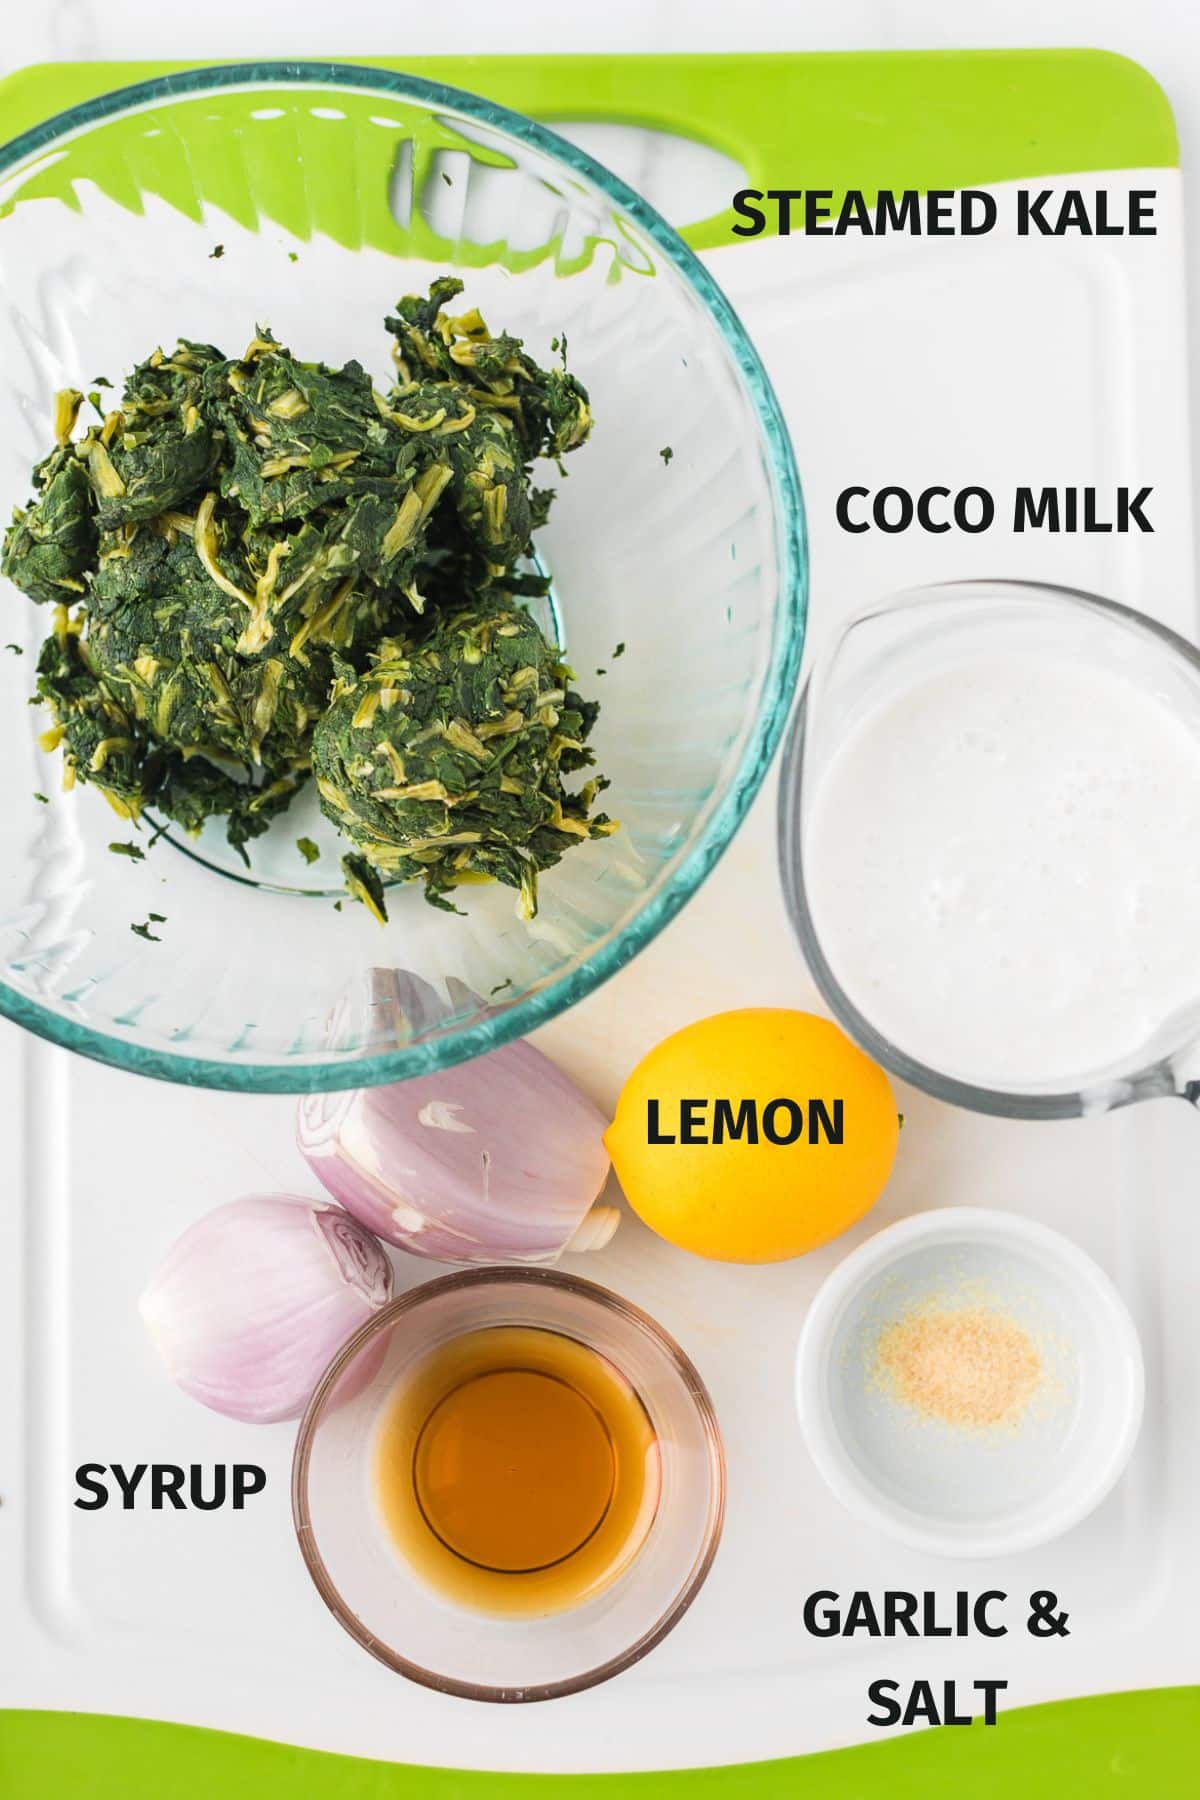 labeled ingredients for creamed kale recipe.